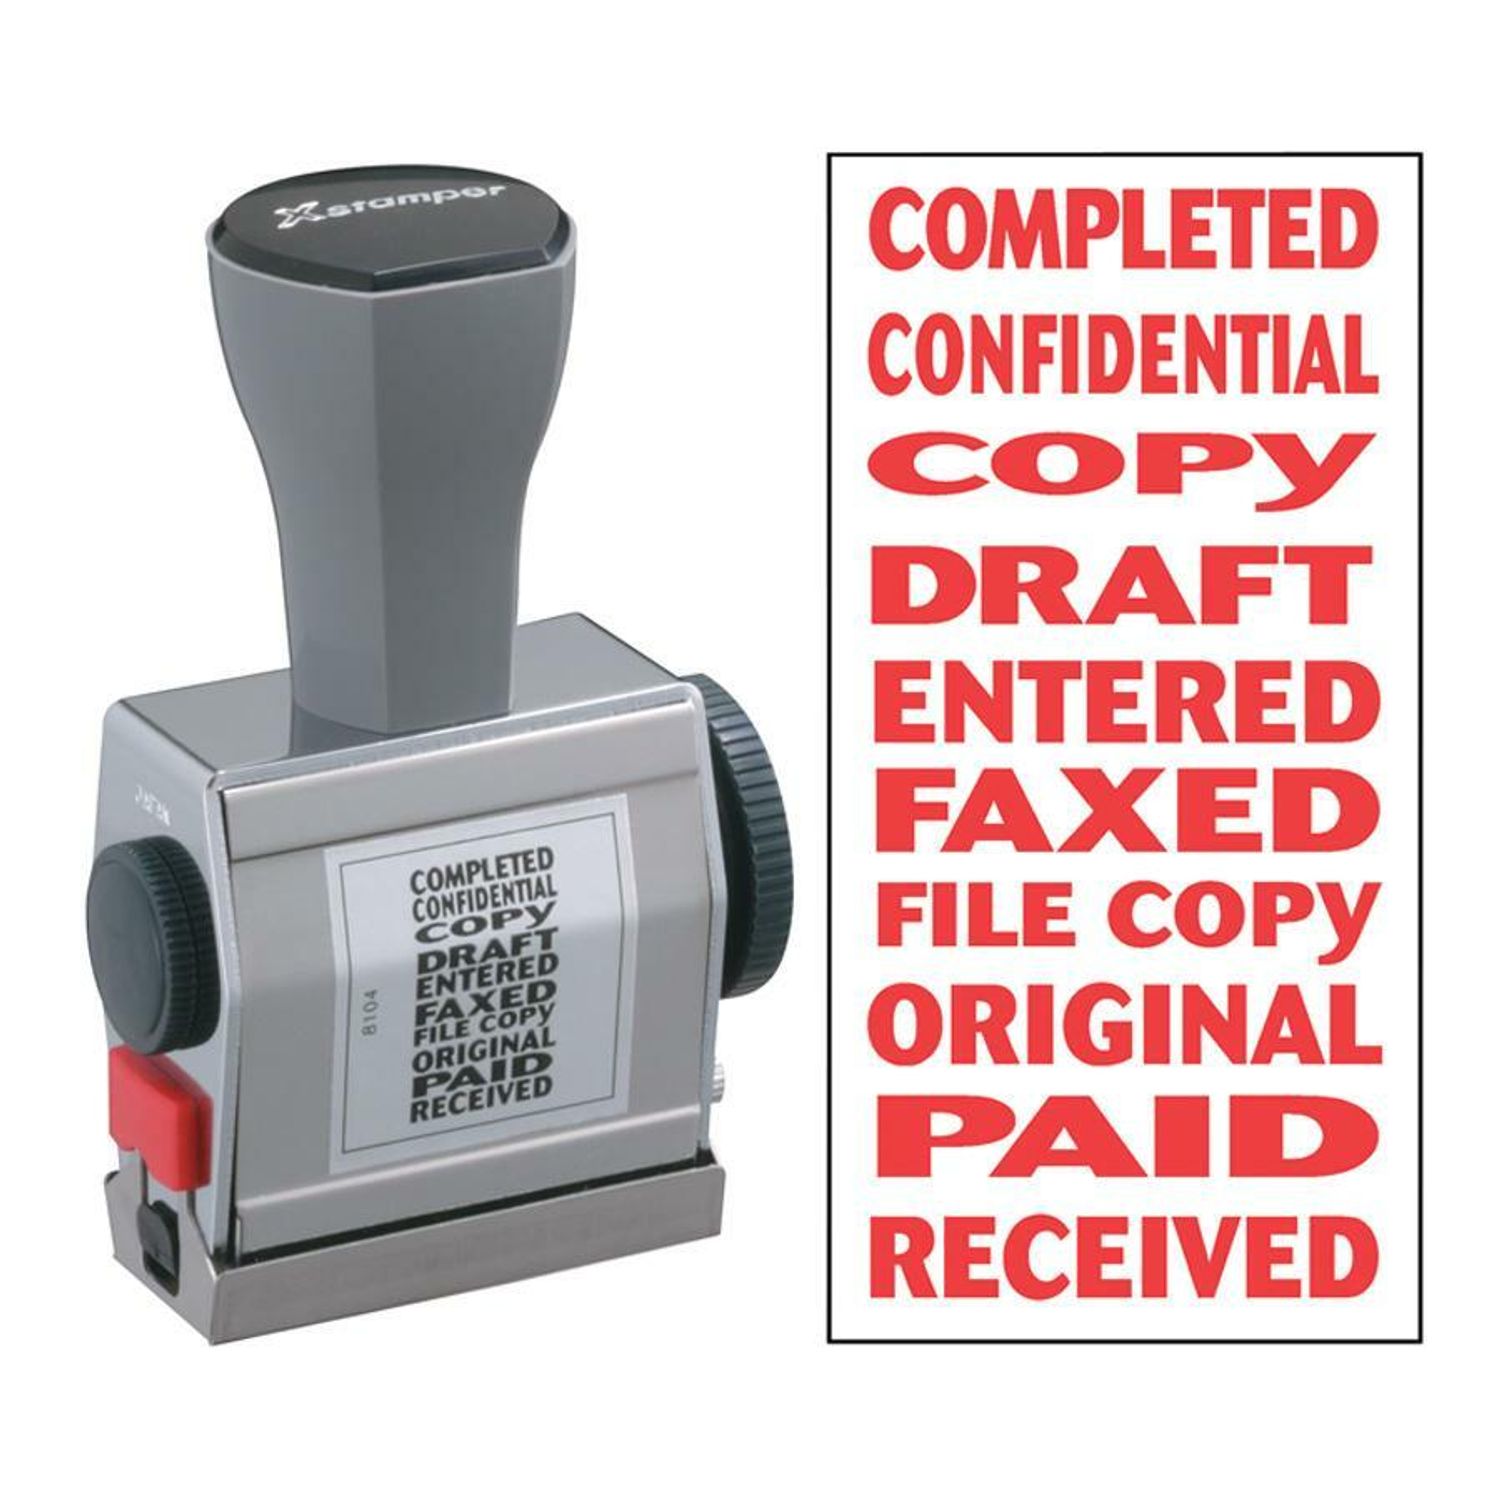 10-In-1 Phrase Stamp Message Stamp, "COMPLETED, CONFIDENTIAL, COPY, DRAFT, ENTERED, FAXED, FILE COPY, ORIGINAL, PAID, RECEIVED", 0.19" Impression Width x 1.50" Impression Length, Red, 1 Each